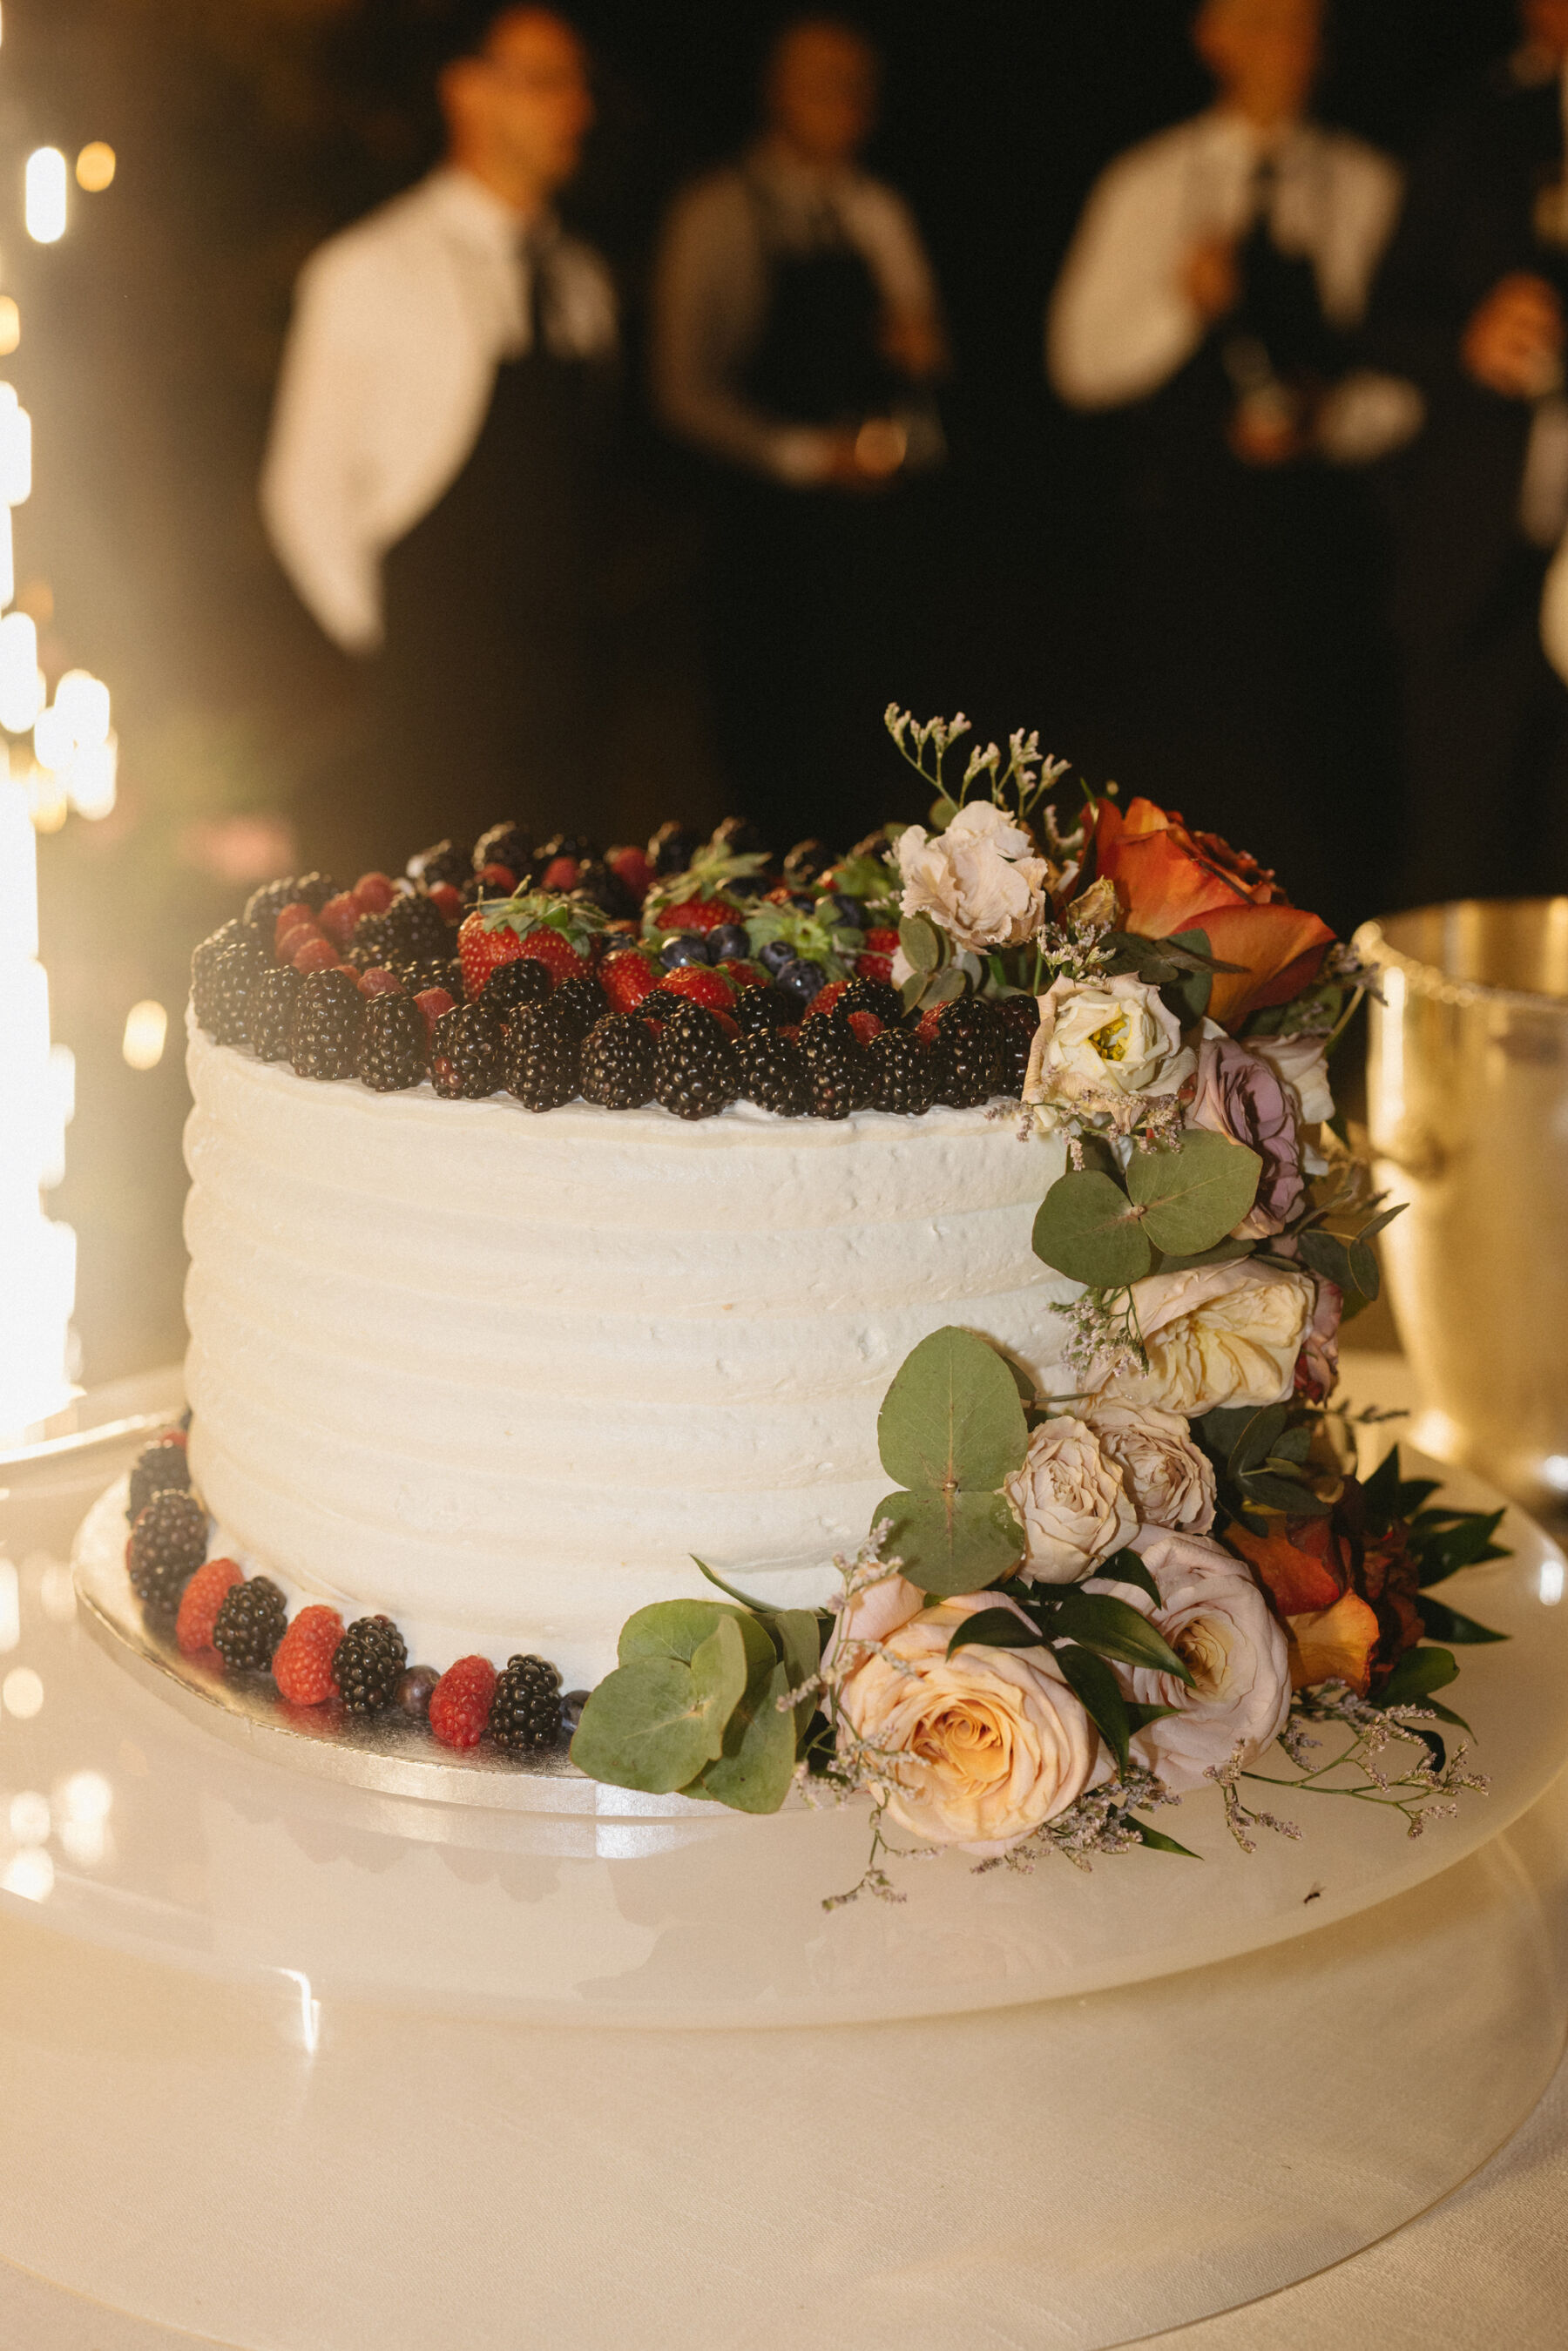 Single tier wedding cake topped with berries.